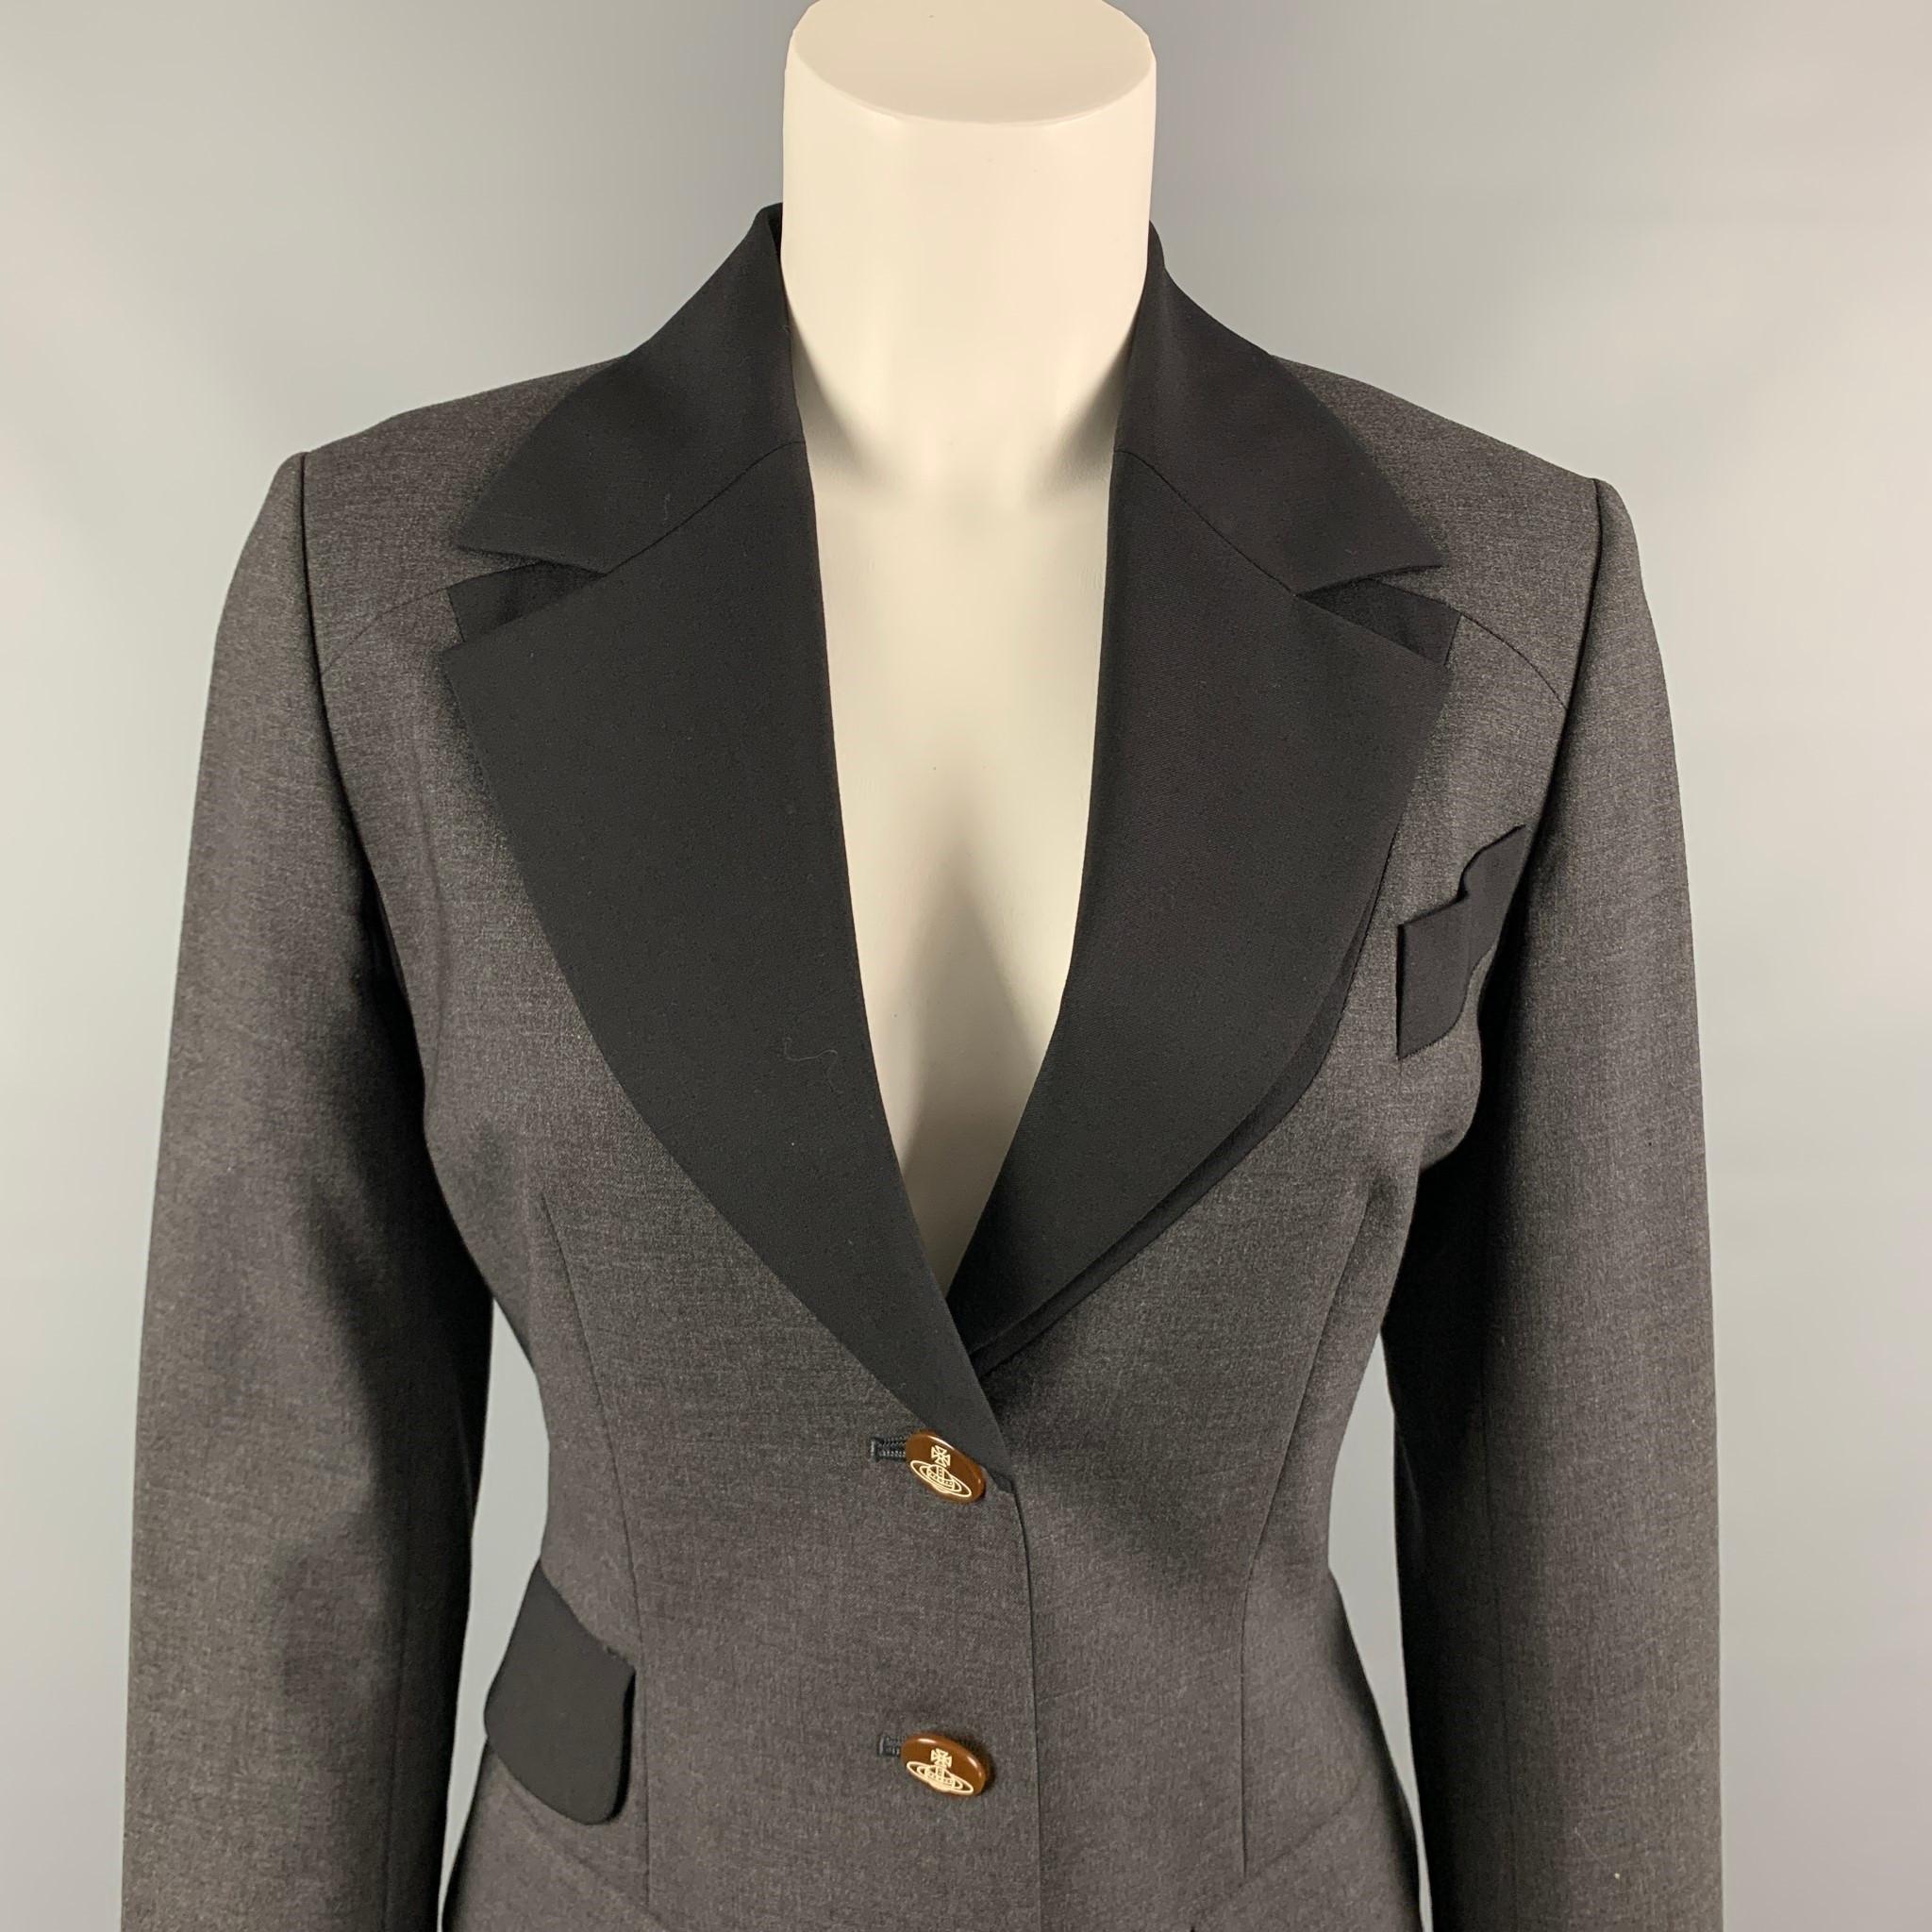 VIVIENNE WESTWOOD RED LABEL jacket comes in a charcoal & black color block with a full monogram print liner featuring a wide collar, flap pockets, and a buttoned closure.

Very Good Pre-Owned Condition.
Marked: 2

Measurements:

Shoulder: 15.5